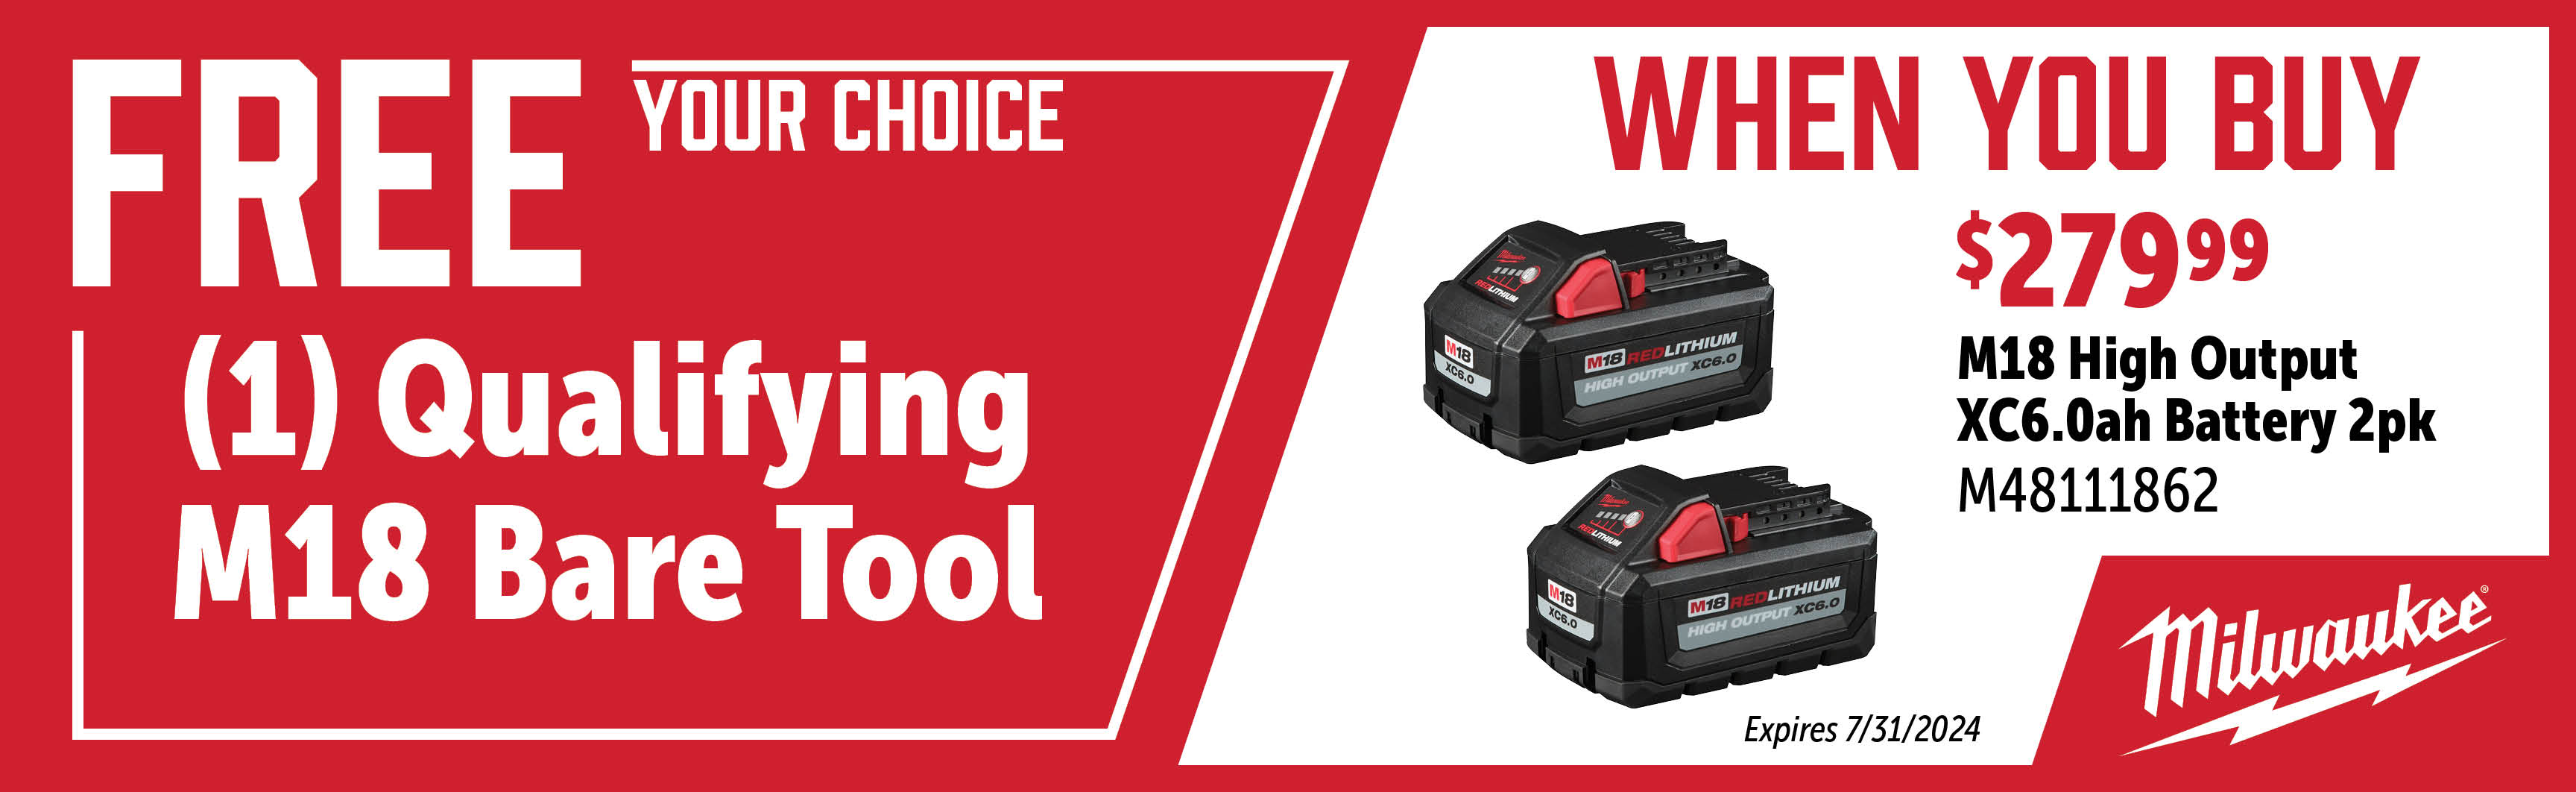 Milwaukee May - July: Buy M48111862 and Get a Free Qualifying M18 Bare Tool